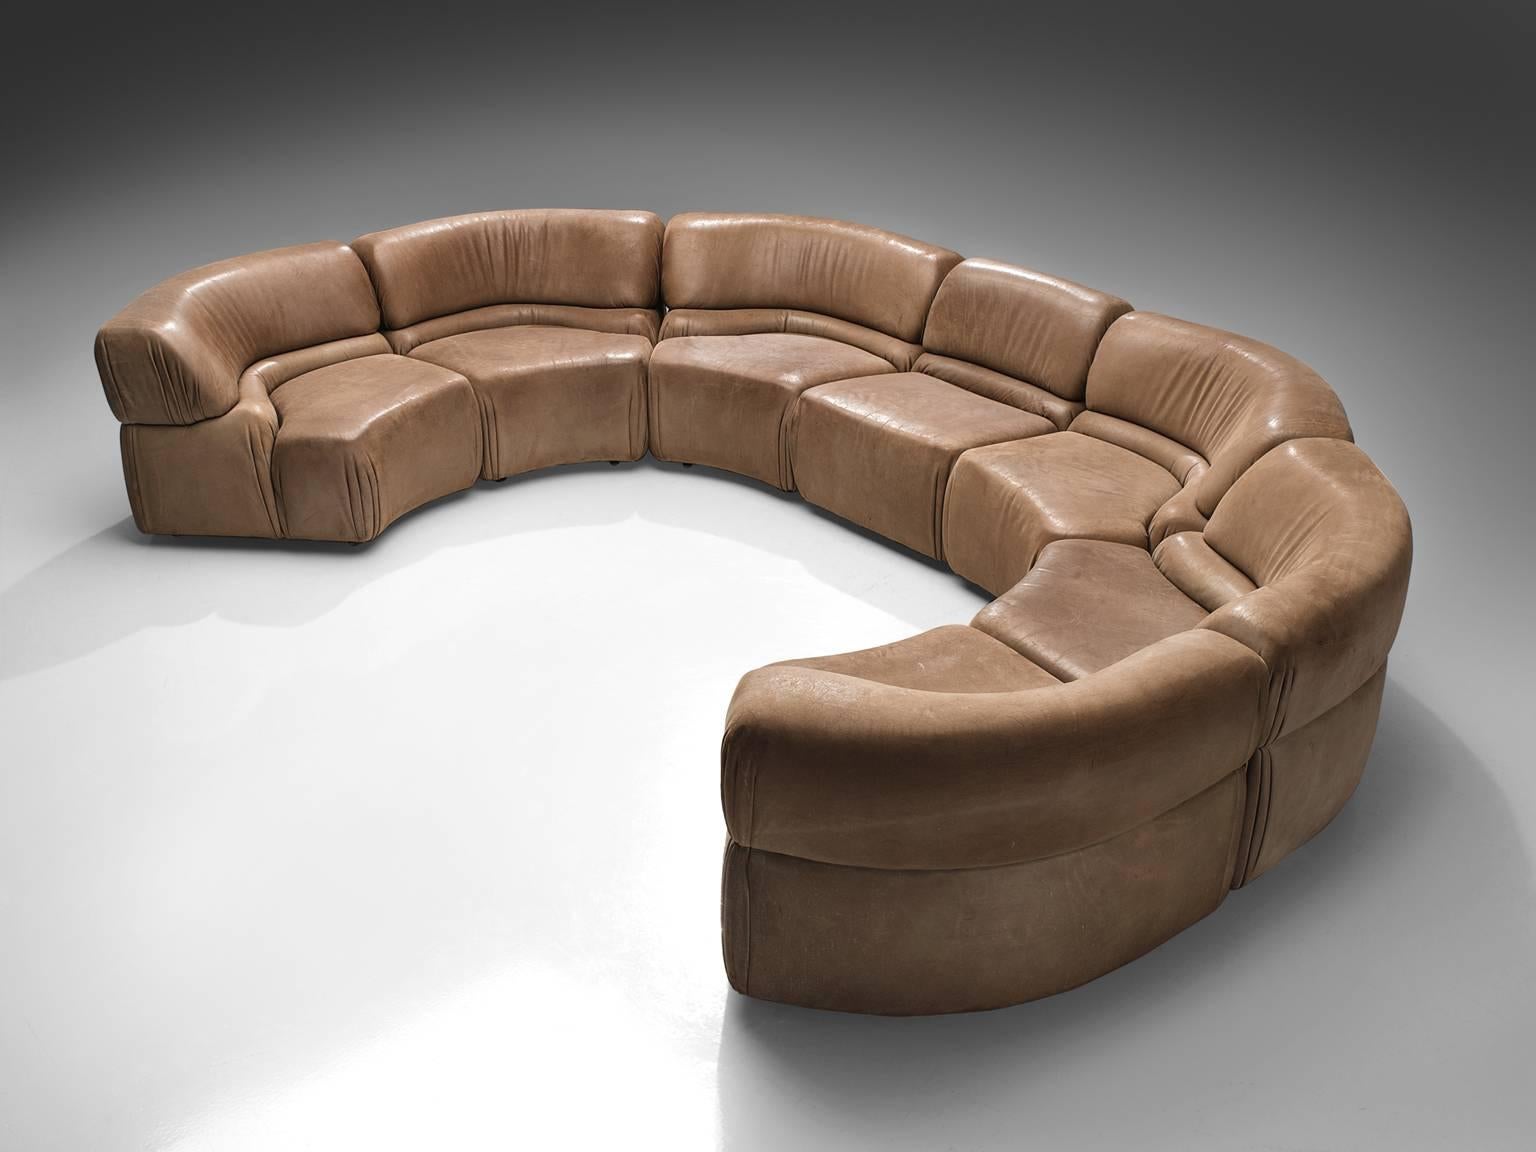 De Sede, 'Cosmos', patinated brown leather, seven elements, Switzerland, 1970s.

Thick, high-quality modular sofa made by De Sede in Switzerland in the 1970s. Due to the separate elements, the couch can be used in a variety of different positions.